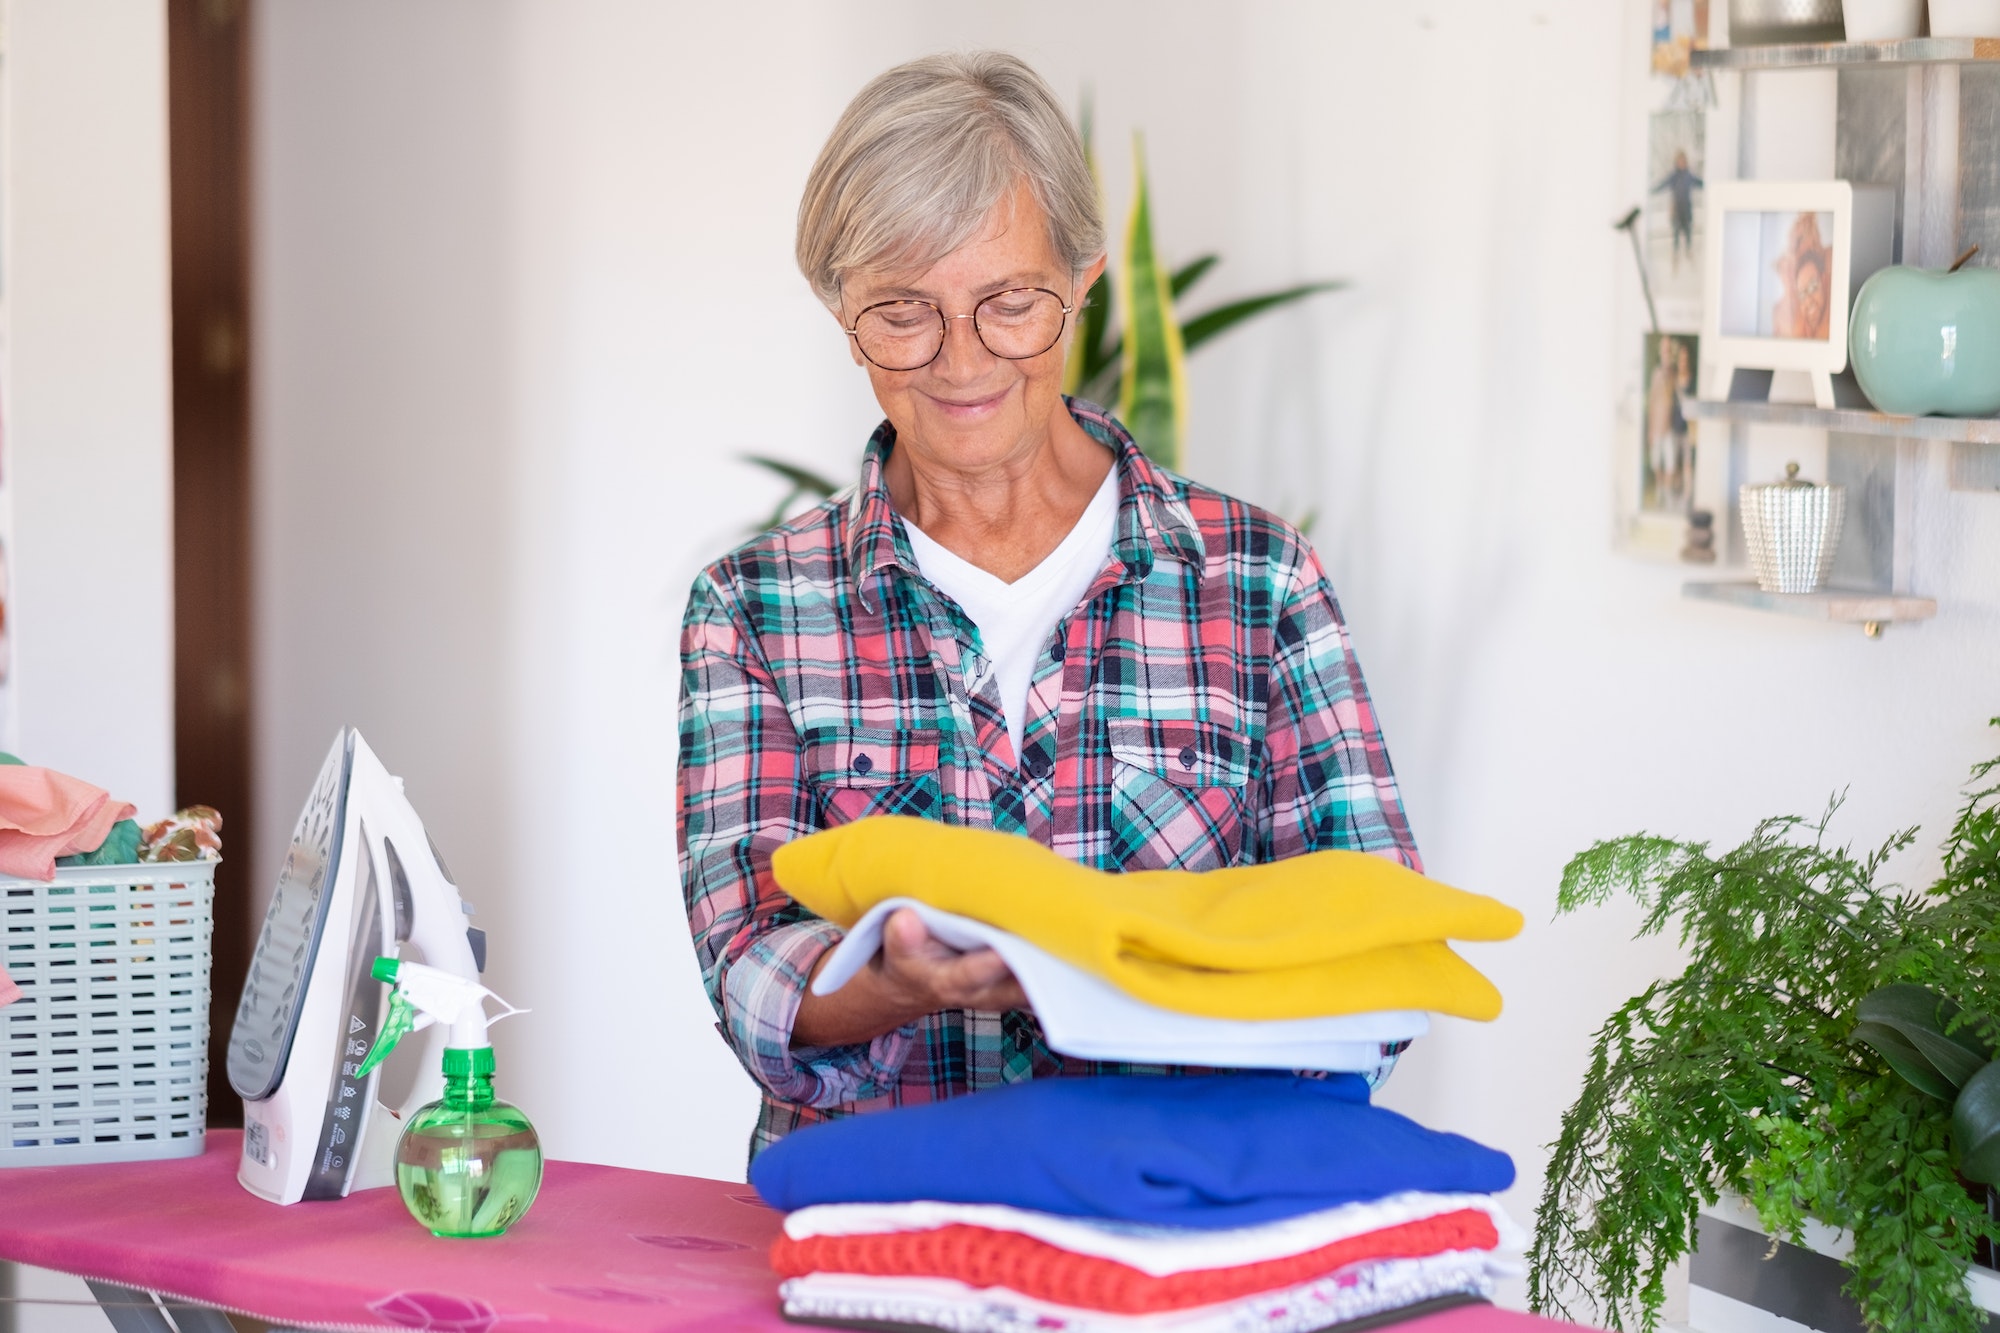 Caucasian smiling senior woman ironing clothes at home on ironing board